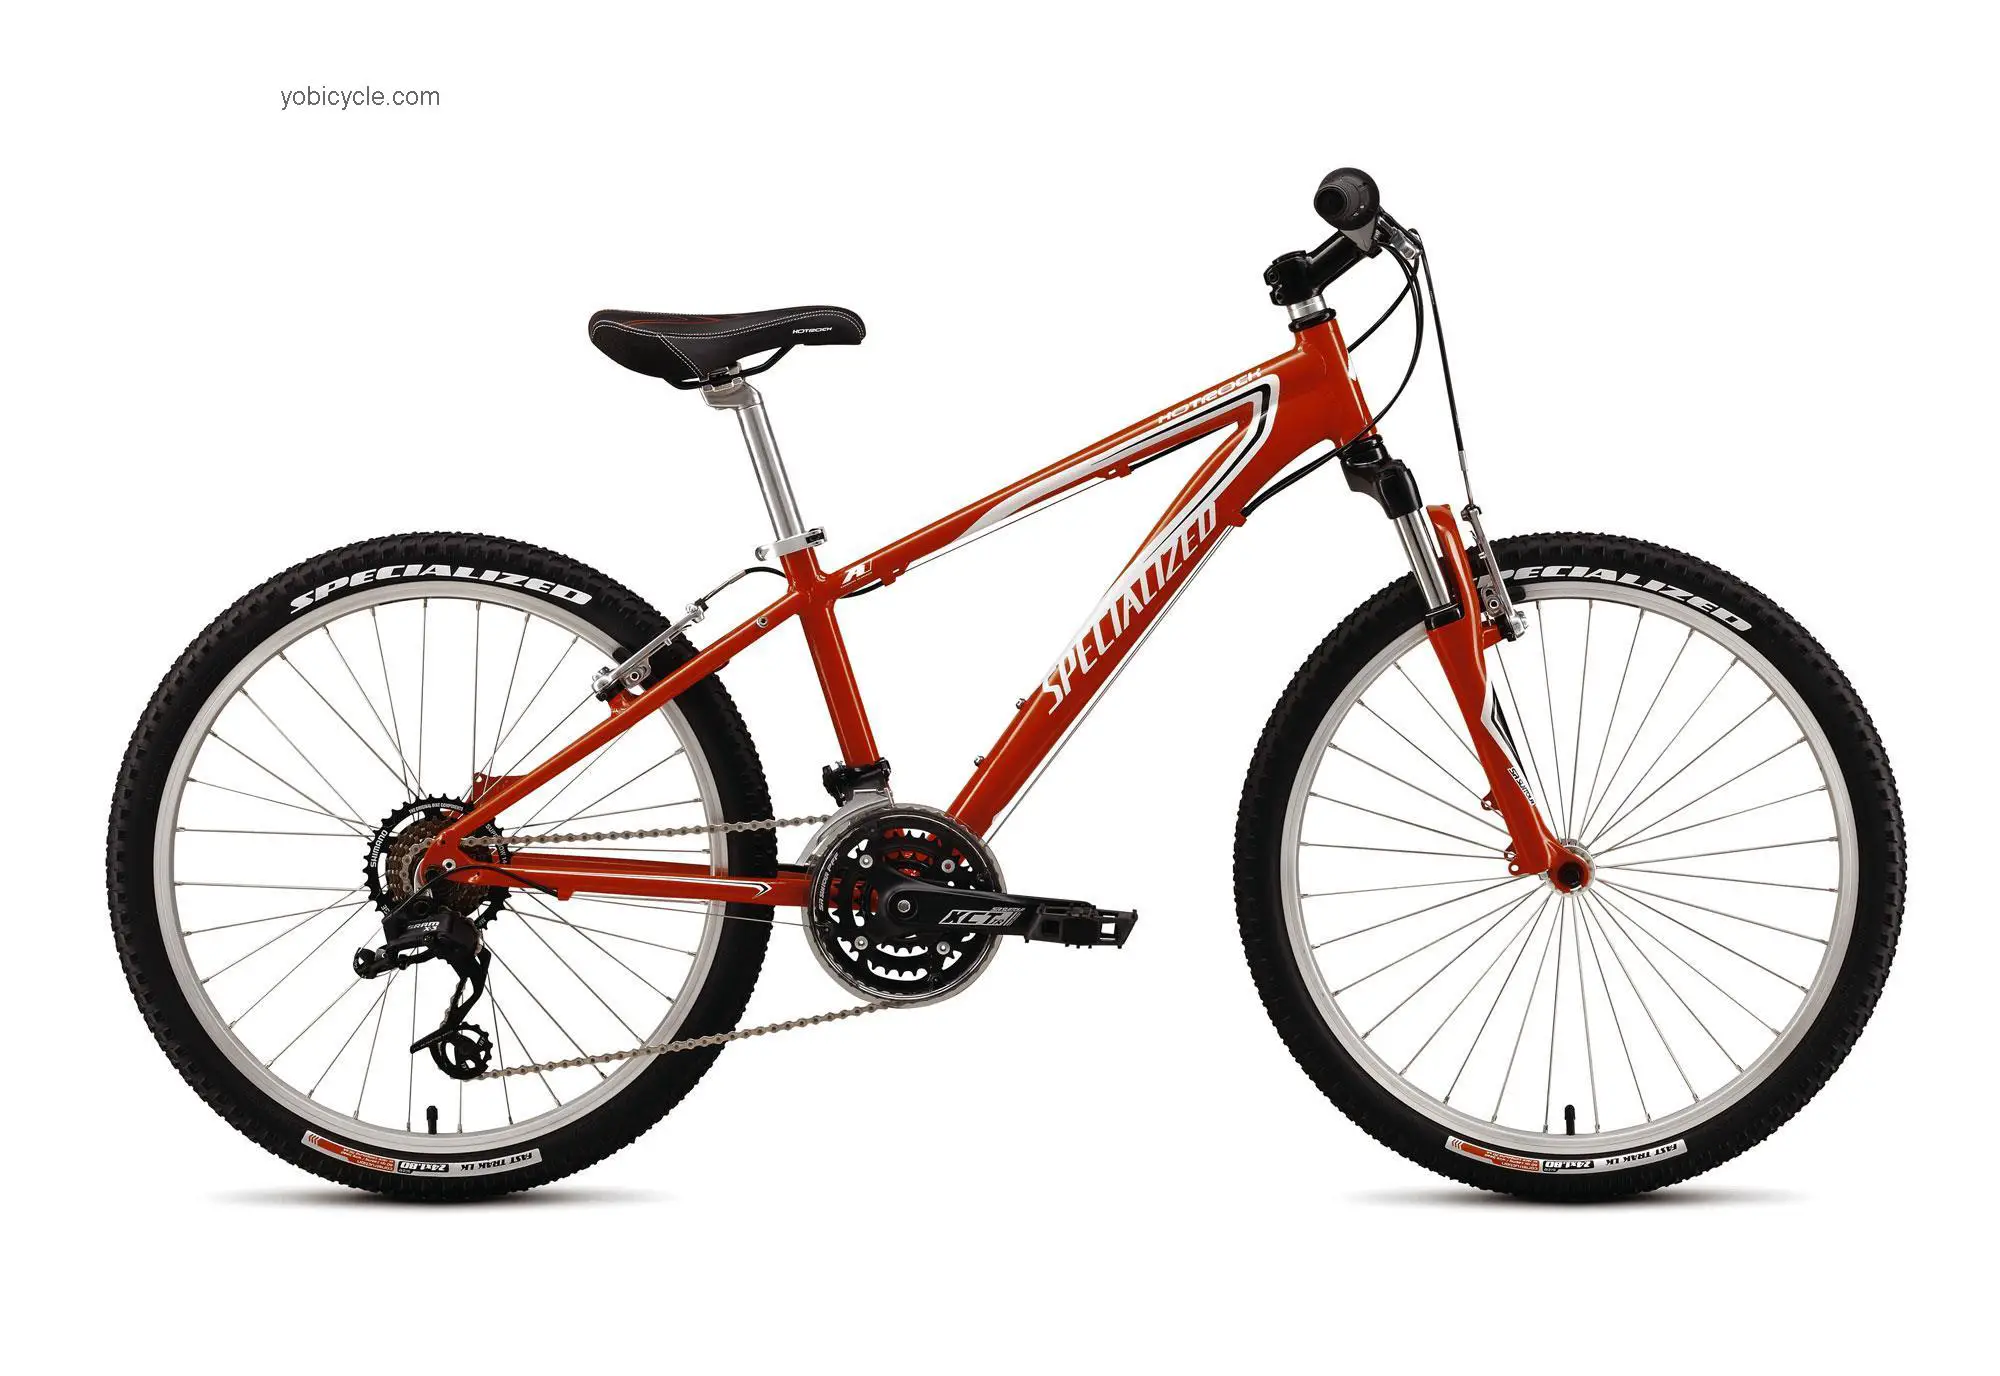 Specialized Hotrock 24 A1 FS Boys 2012 comparison online with competitors